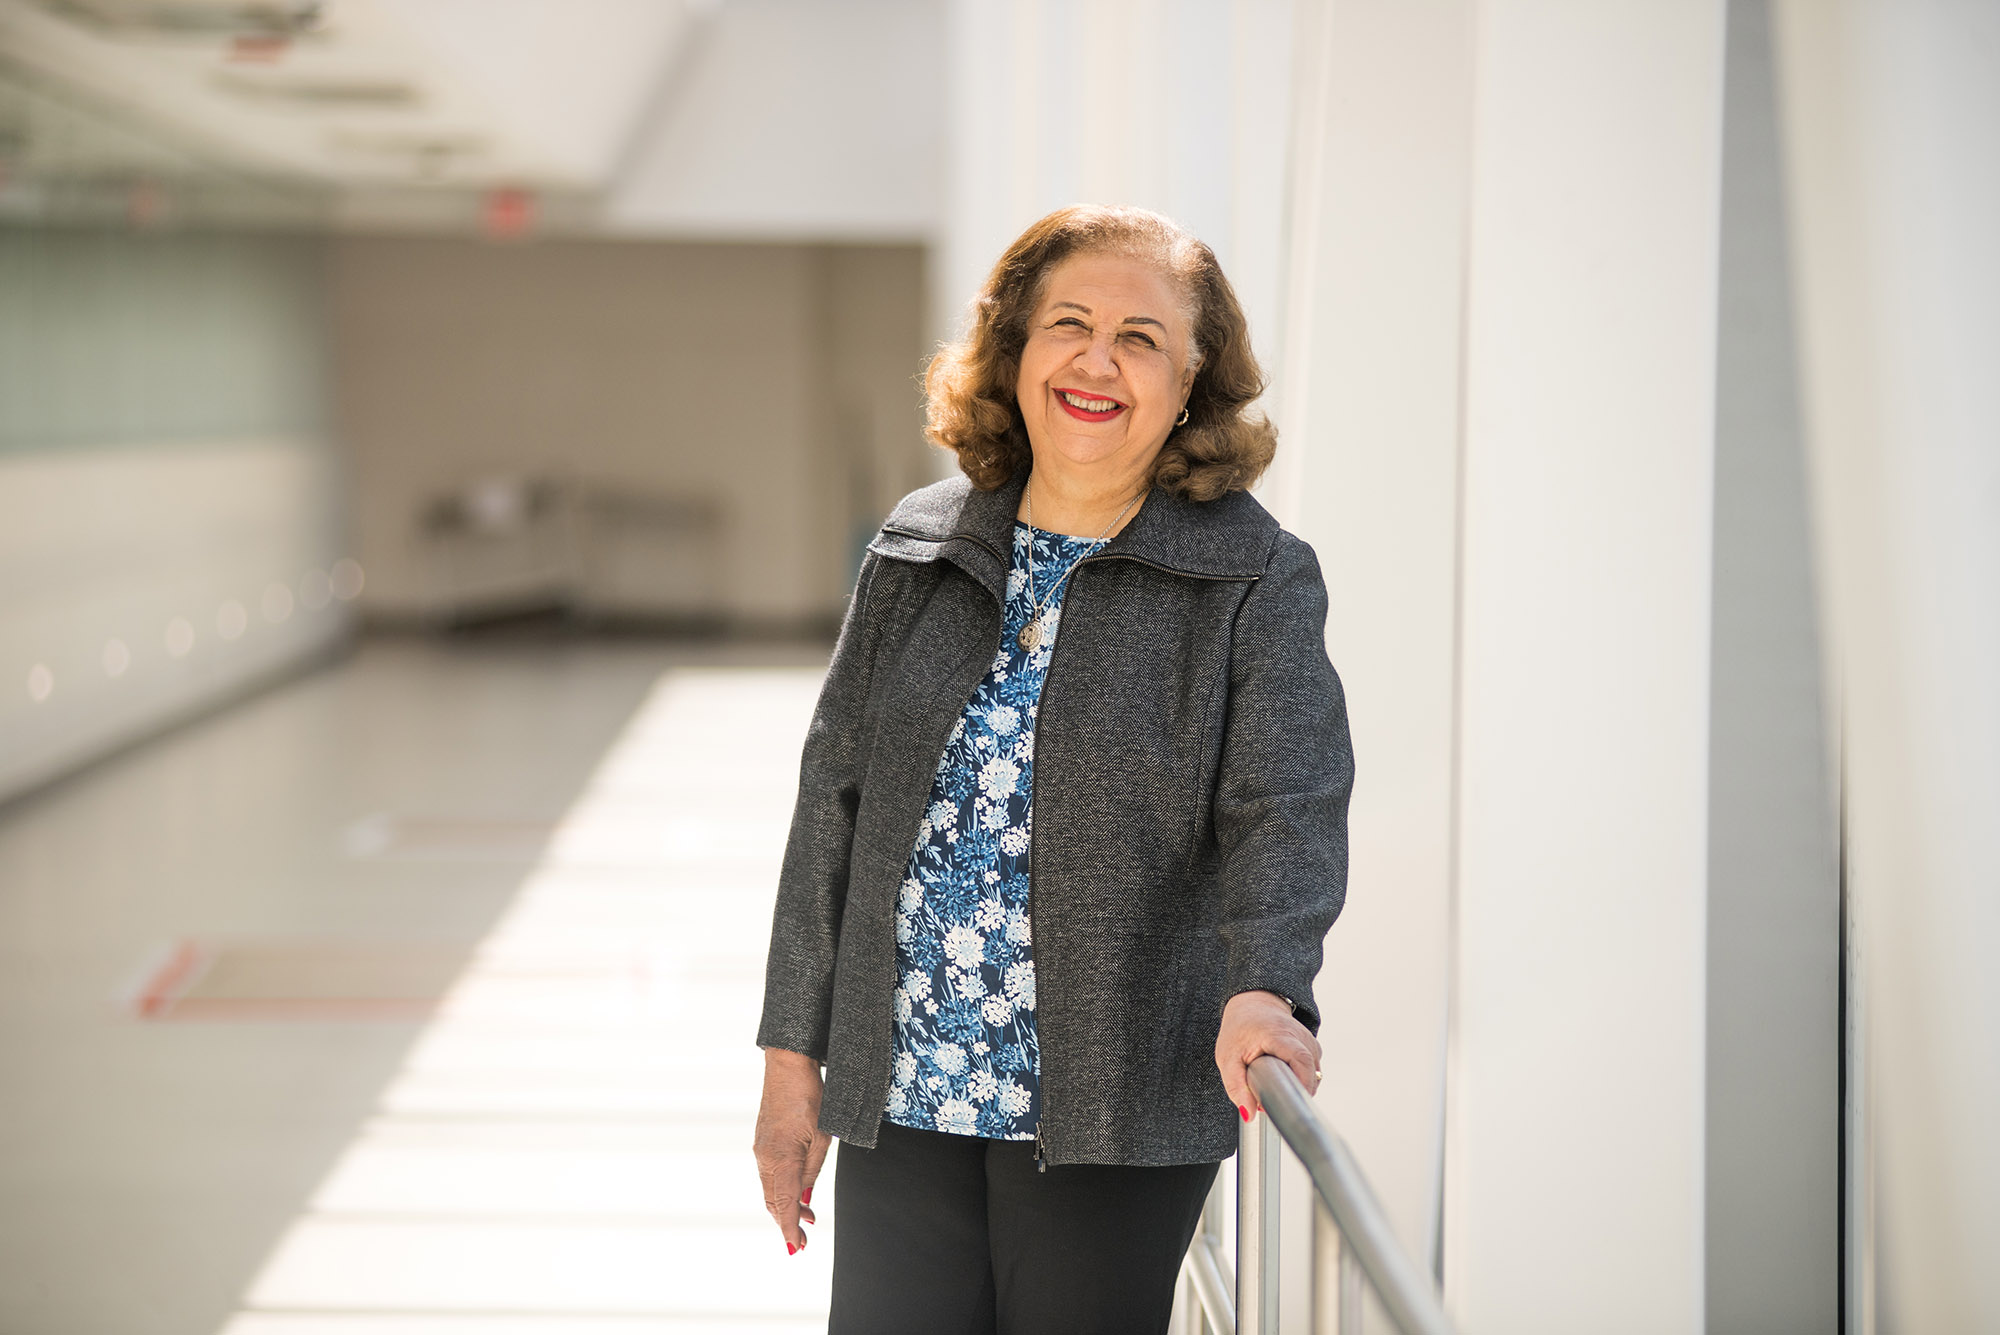 Photo: Marcelle Willock, MD. A light-skinned, older Black woman with light brown hair smiles and poses in the hallway of a bright, sunlit hospital. She wears a blue floral blouse, grey jacket, and black pants.